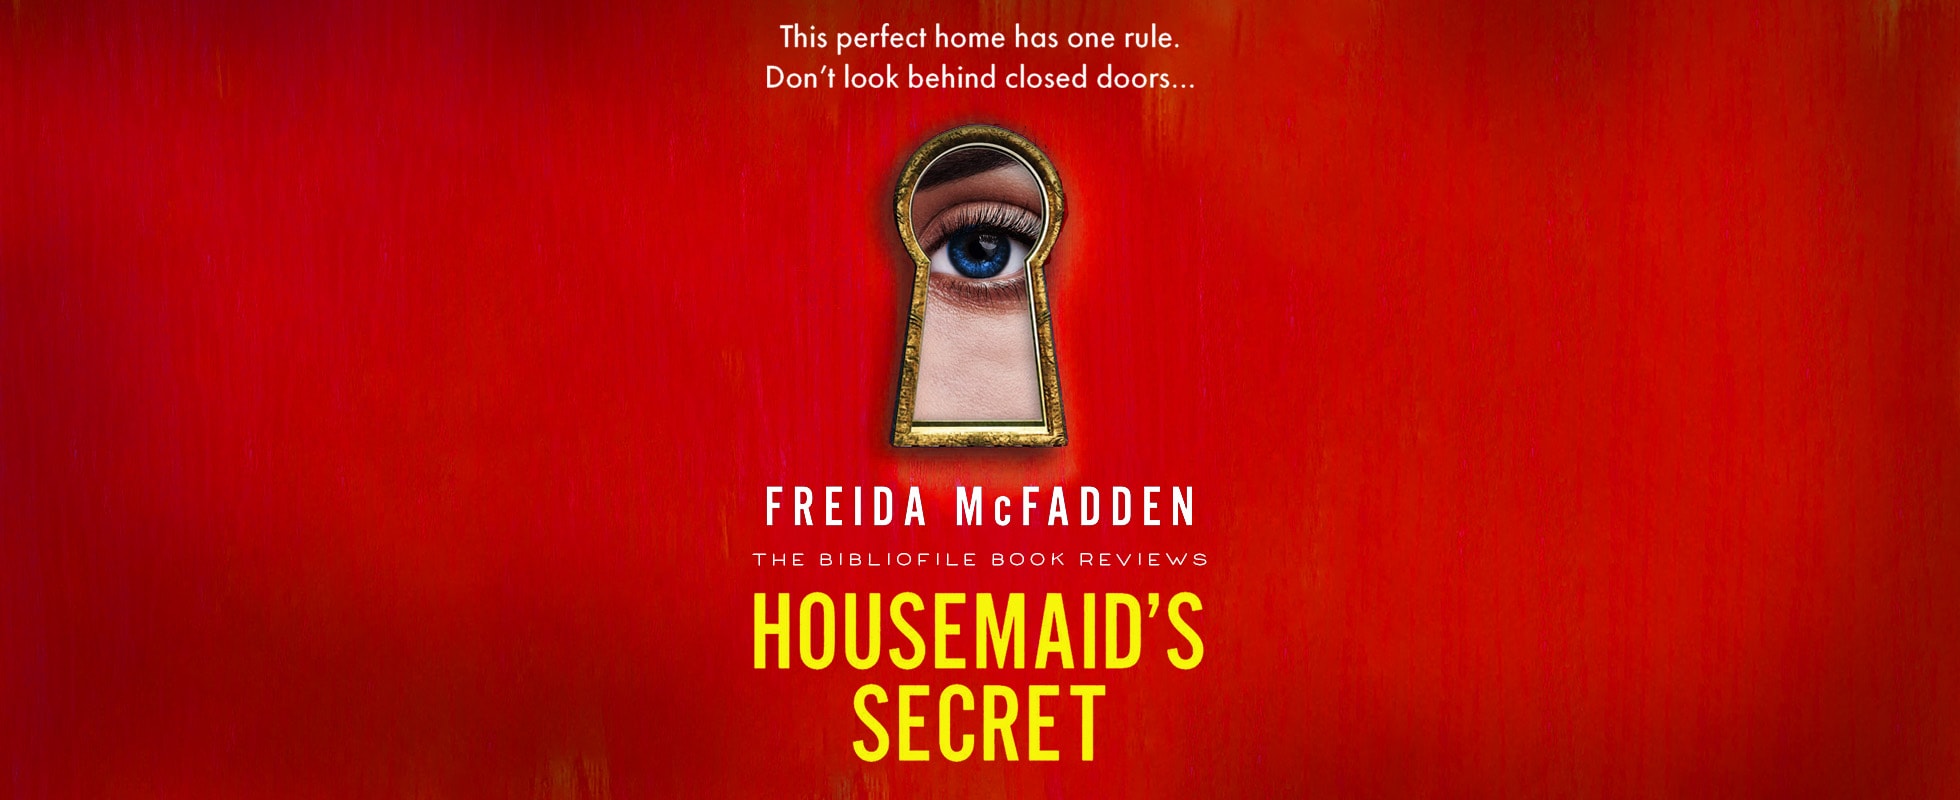 the housemaid's secret by freida mcfadden book review plot summary synopsis recap discussion spoilers